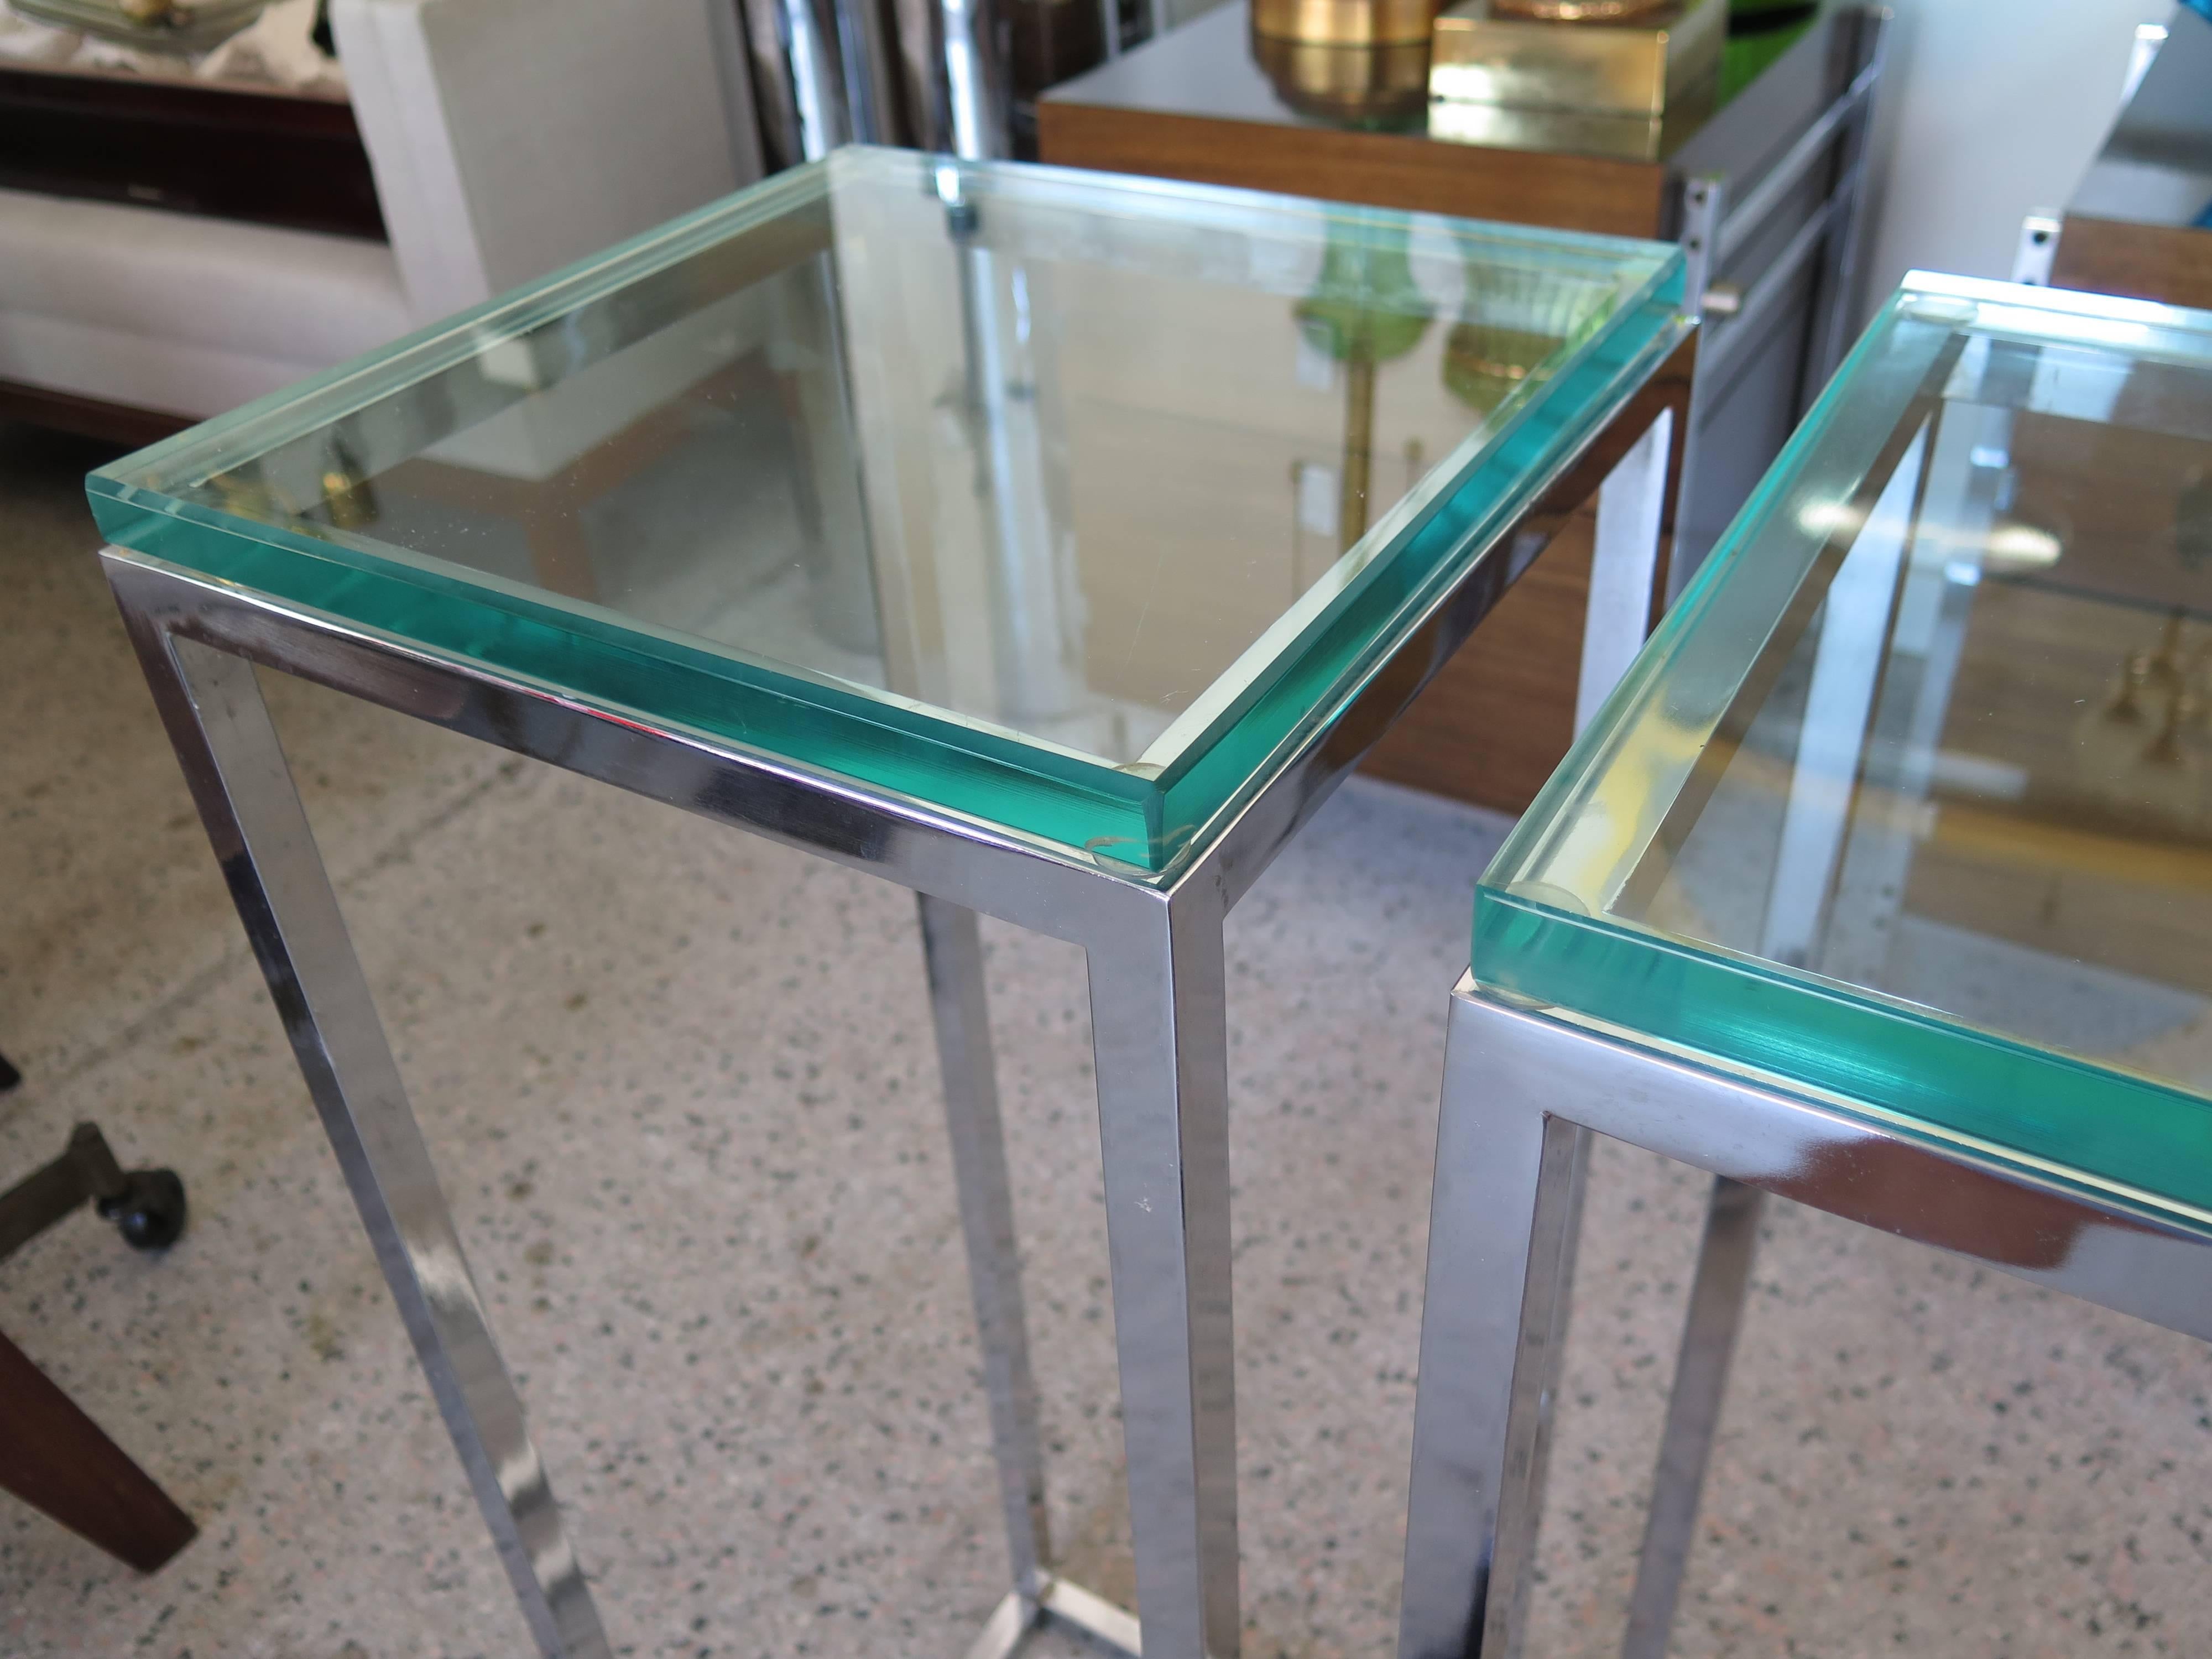 A pair of tall, chrome pedestal tables with glass tops. Chrome-plated brass frames, 3/4"bevelled glass. Measuring: 34.25" H, 12" D, 12" W.